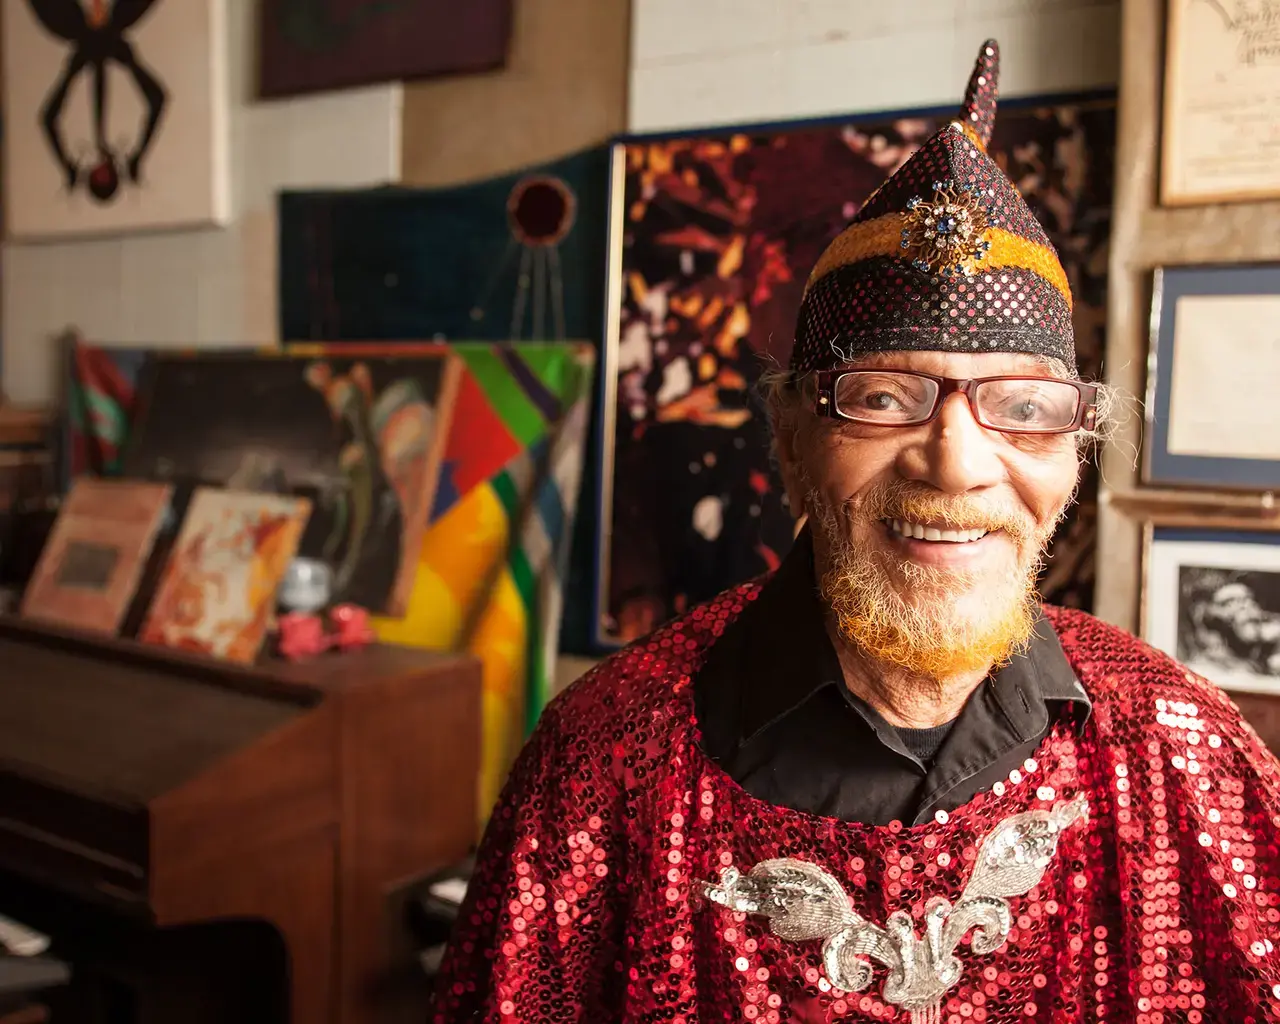 Marshall Allen, 2012 Pew Fellow. Photo by Colin Lenton.